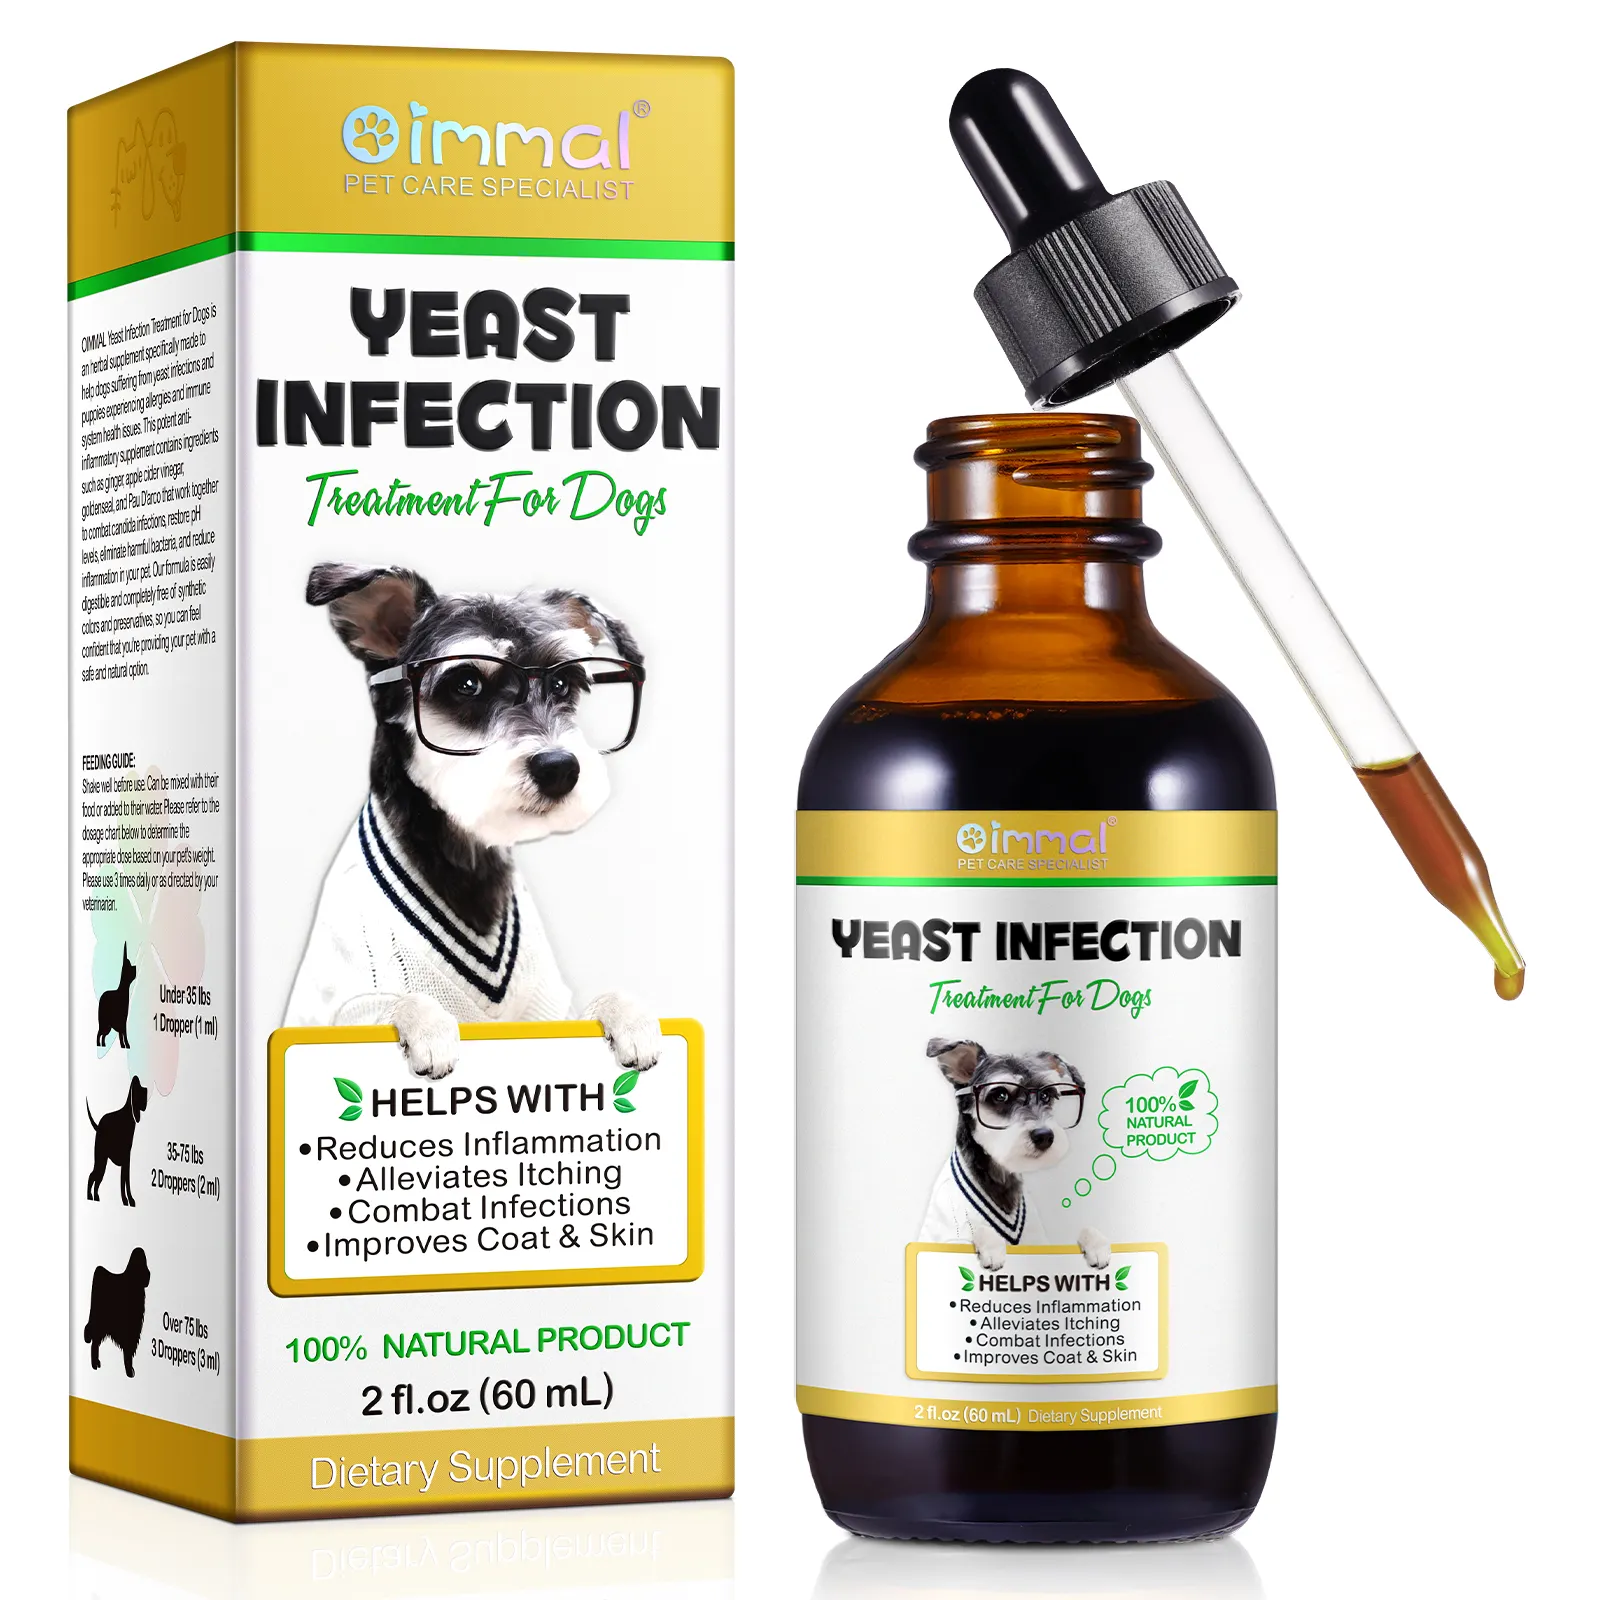 Oimmal Natural Liquid Drops Cellular Health Support Yeast Infection Treatment For Dogs Improves Coat Skin Allergy & Itch Relief